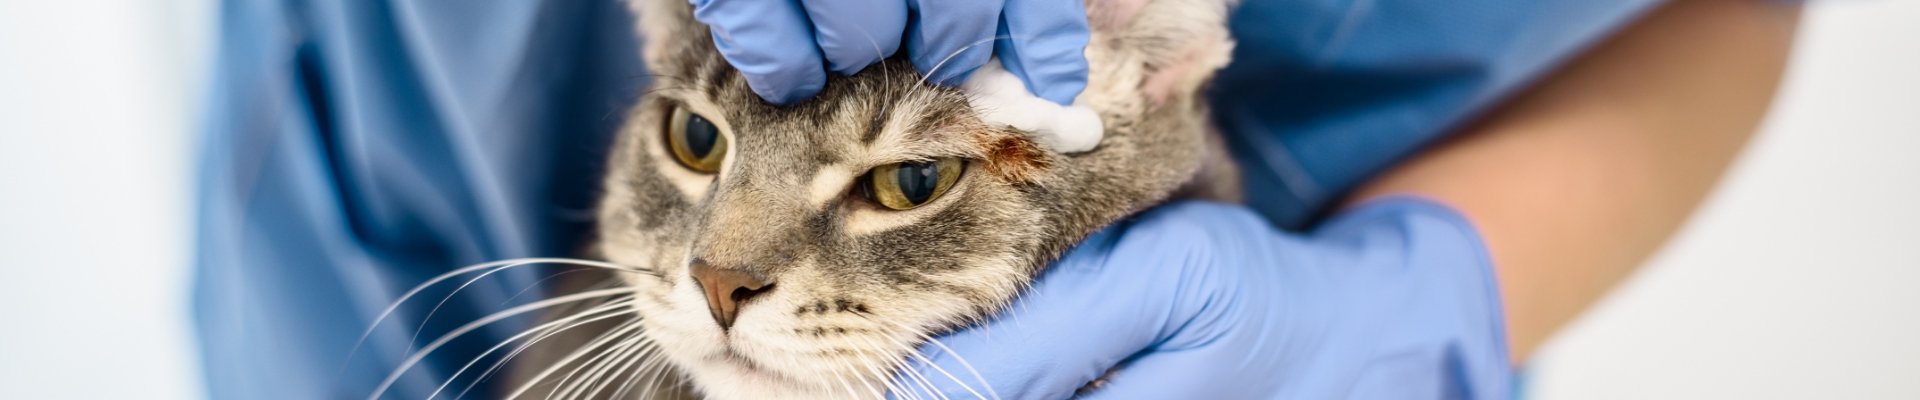 A vet cleaning a tabby cat's ears